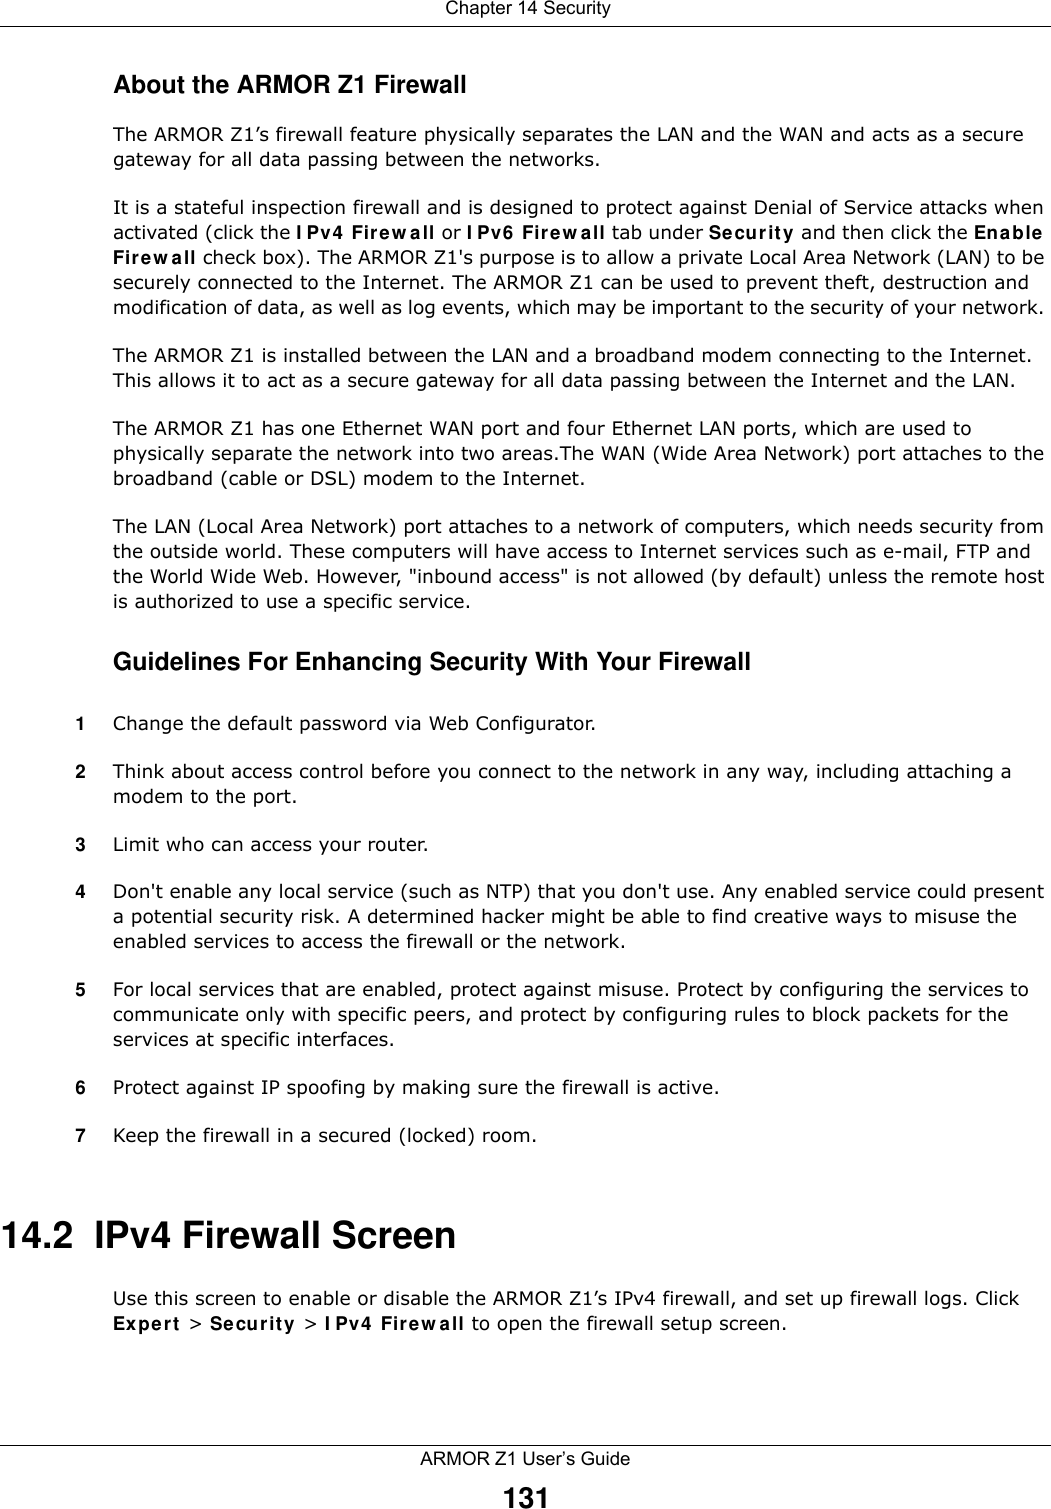  Chapter 14 SecurityARMOR Z1 User’s Guide131About the ARMOR Z1 FirewallThe ARMOR Z1’s firewall feature physically separates the LAN and the WAN and acts as a secure gateway for all data passing between the networks.It is a stateful inspection firewall and is designed to protect against Denial of Service attacks when activated (click the IPv4 Firewall or IPv6 Firewall tab under Security and then click the Enable Firewall check box). The ARMOR Z1&apos;s purpose is to allow a private Local Area Network (LAN) to be securely connected to the Internet. The ARMOR Z1 can be used to prevent theft, destruction and modification of data, as well as log events, which may be important to the security of your network. The ARMOR Z1 is installed between the LAN and a broadband modem connecting to the Internet. This allows it to act as a secure gateway for all data passing between the Internet and the LAN.The ARMOR Z1 has one Ethernet WAN port and four Ethernet LAN ports, which are used to physically separate the network into two areas.The WAN (Wide Area Network) port attaches to the broadband (cable or DSL) modem to the Internet.The LAN (Local Area Network) port attaches to a network of computers, which needs security from the outside world. These computers will have access to Internet services such as e-mail, FTP and the World Wide Web. However, &quot;inbound access&quot; is not allowed (by default) unless the remote host is authorized to use a specific service.Guidelines For Enhancing Security With Your Firewall1Change the default password via Web Configurator. 2Think about access control before you connect to the network in any way, including attaching a modem to the port. 3Limit who can access your router. 4Don&apos;t enable any local service (such as NTP) that you don&apos;t use. Any enabled service could present a potential security risk. A determined hacker might be able to find creative ways to misuse the enabled services to access the firewall or the network. 5For local services that are enabled, protect against misuse. Protect by configuring the services to communicate only with specific peers, and protect by configuring rules to block packets for the services at specific interfaces. 6Protect against IP spoofing by making sure the firewall is active. 7Keep the firewall in a secured (locked) room. 14.2  IPv4 Firewall Screen   Use this screen to enable or disable the ARMOR Z1’s IPv4 firewall, and set up firewall logs. Click Expert &gt; Security &gt; IPv4 Firewall to open the firewall setup screen.